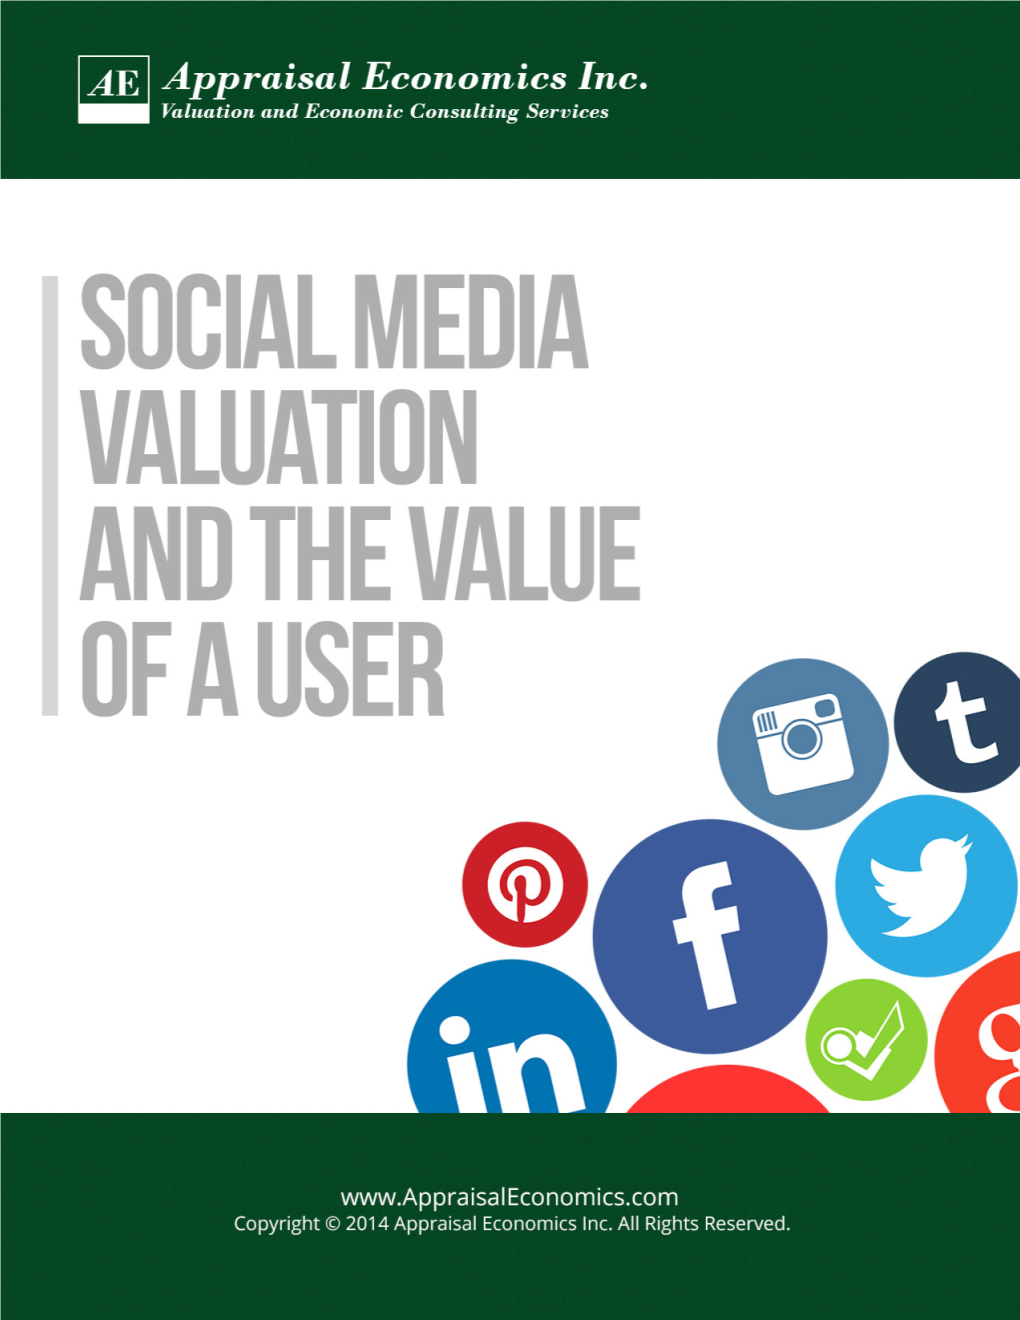 Social Media Valuation and the Value of a User